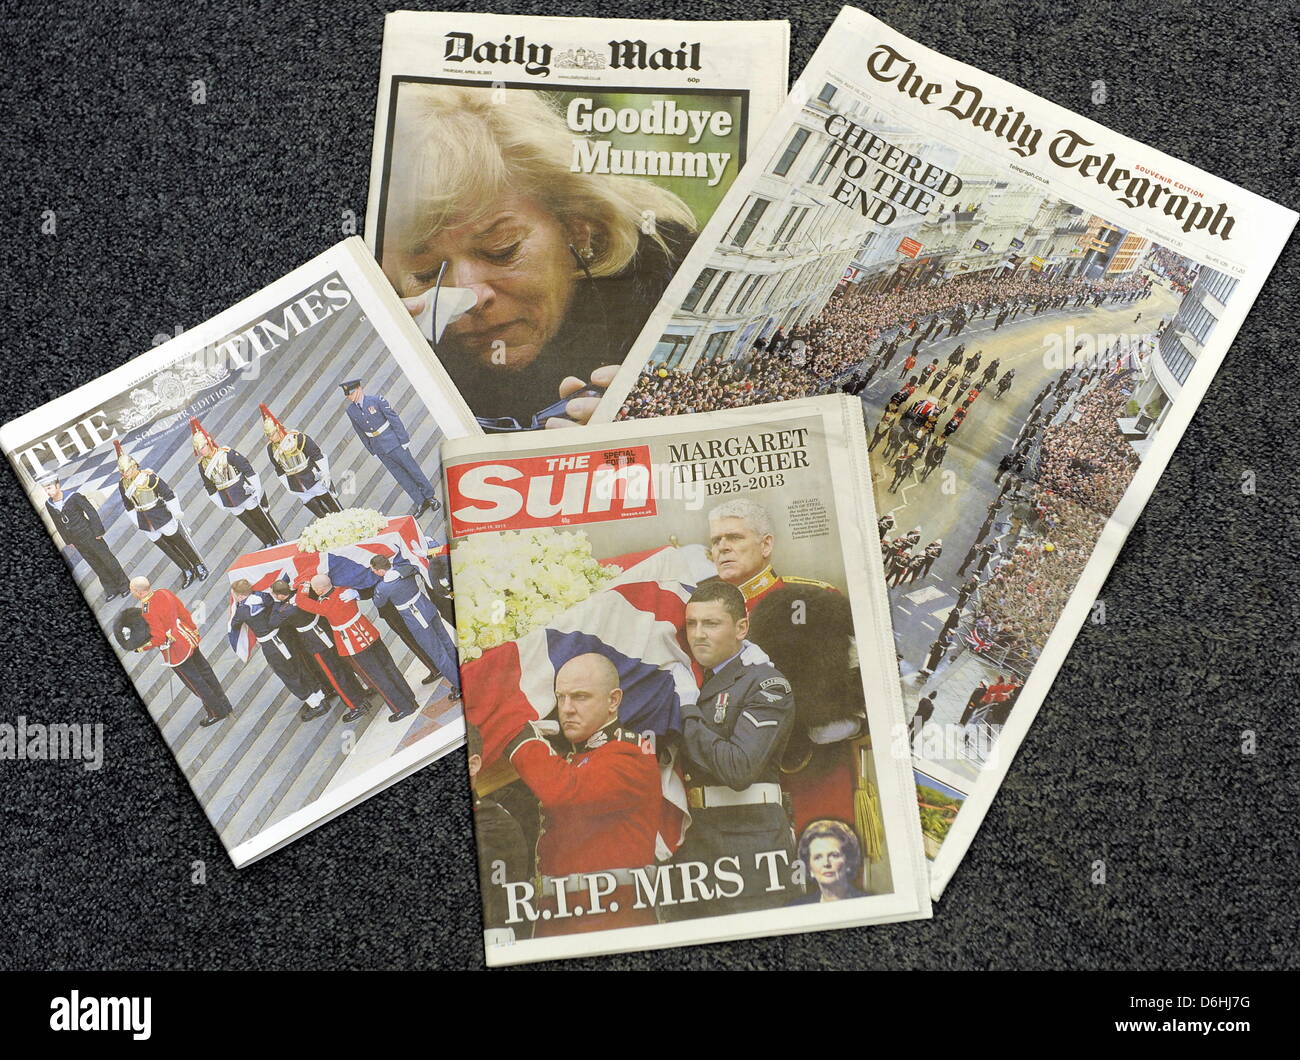 The front pages of National newspapers on Thursday 18th April 2013. The Sun, The Times, The Daily Telegraph and The Daily Mail all carrying the pictures and the story of the funeral of former Prime Minister Margaret Thatcher at St Pauls Cathedral in London on Wednesday 17th April 2013:  18 April 2013  STUART WALKER Stock Photo